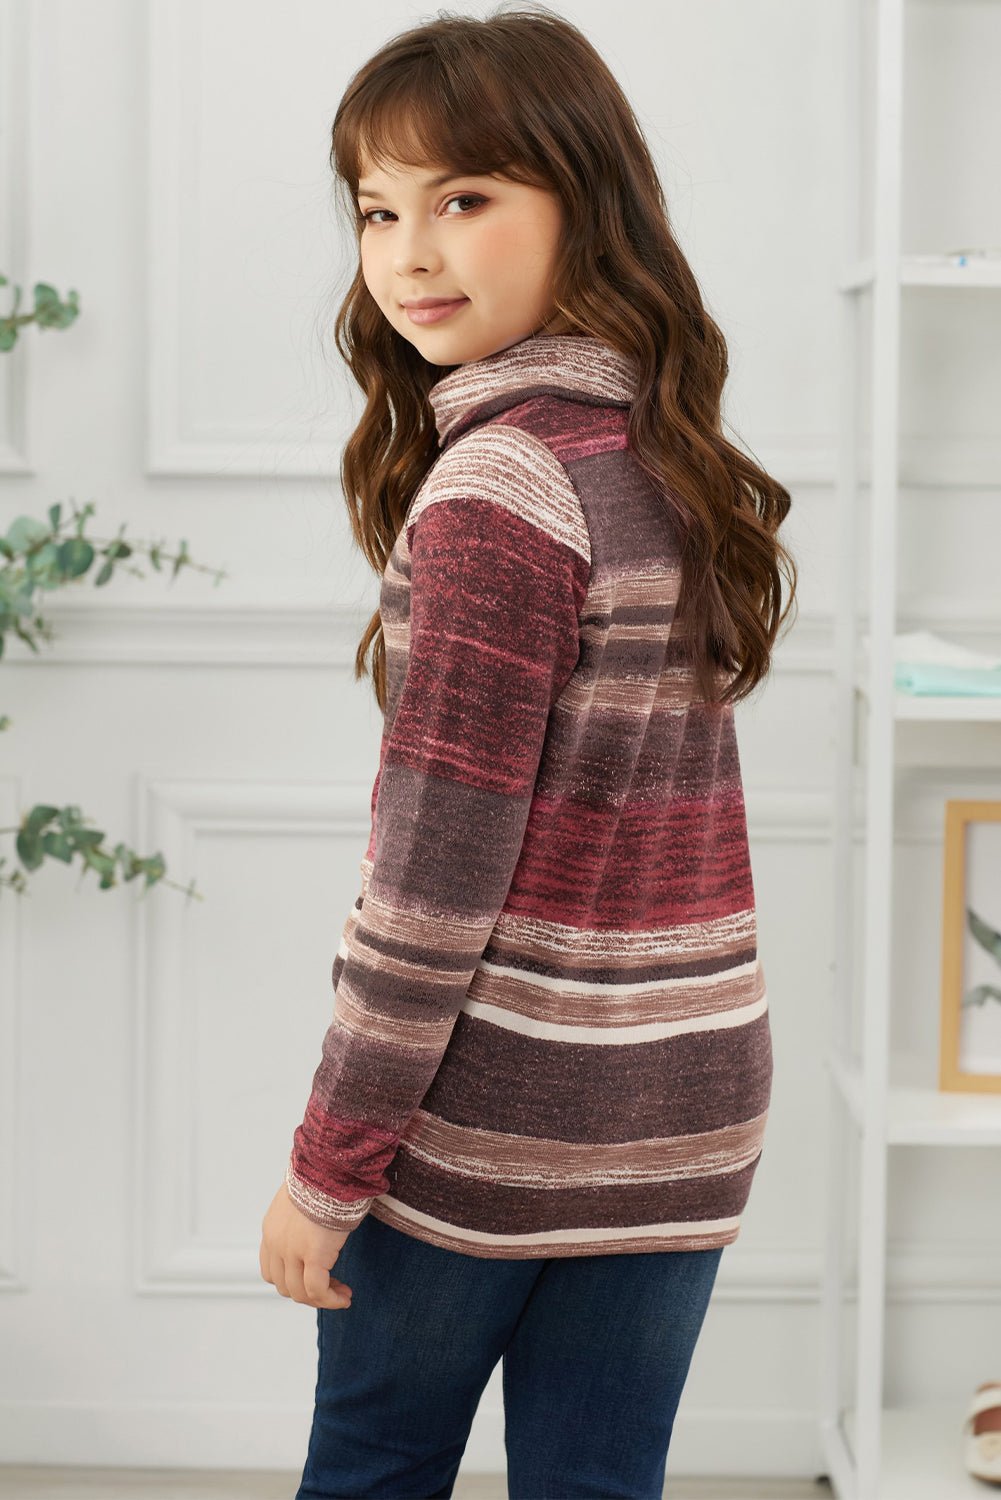 Girls Striped Cowl Neck Top with Pockets - Fashion Girl Online Store